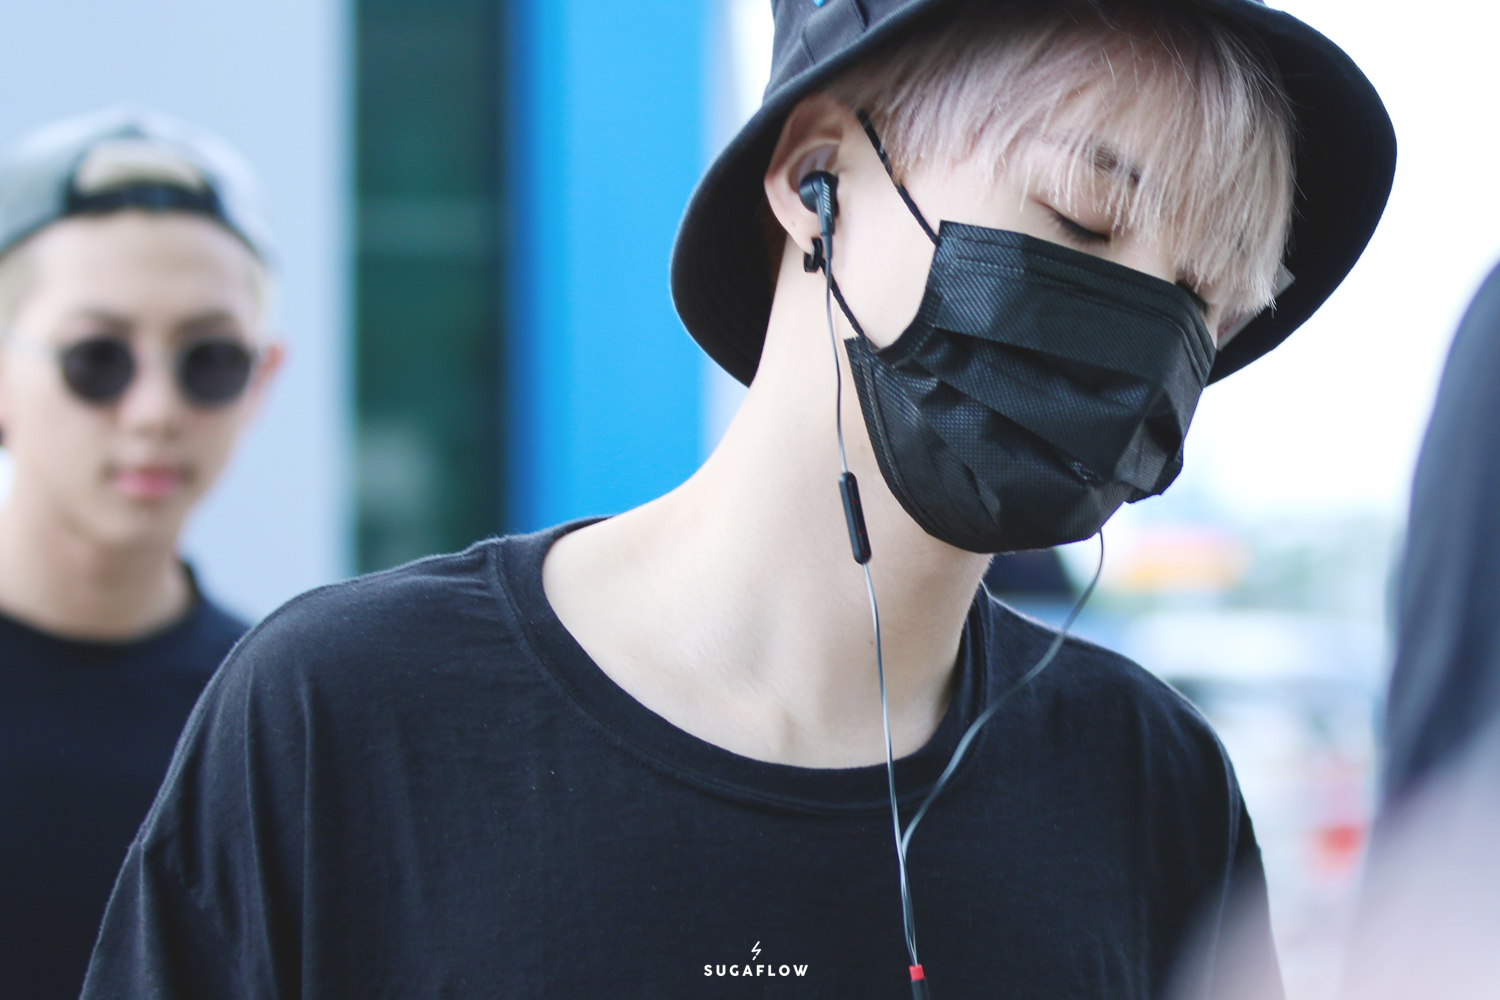 rest) on X: Photo by K-Media 220328 BTS at Incheon Airport Min Yoongi #SUGA   / X